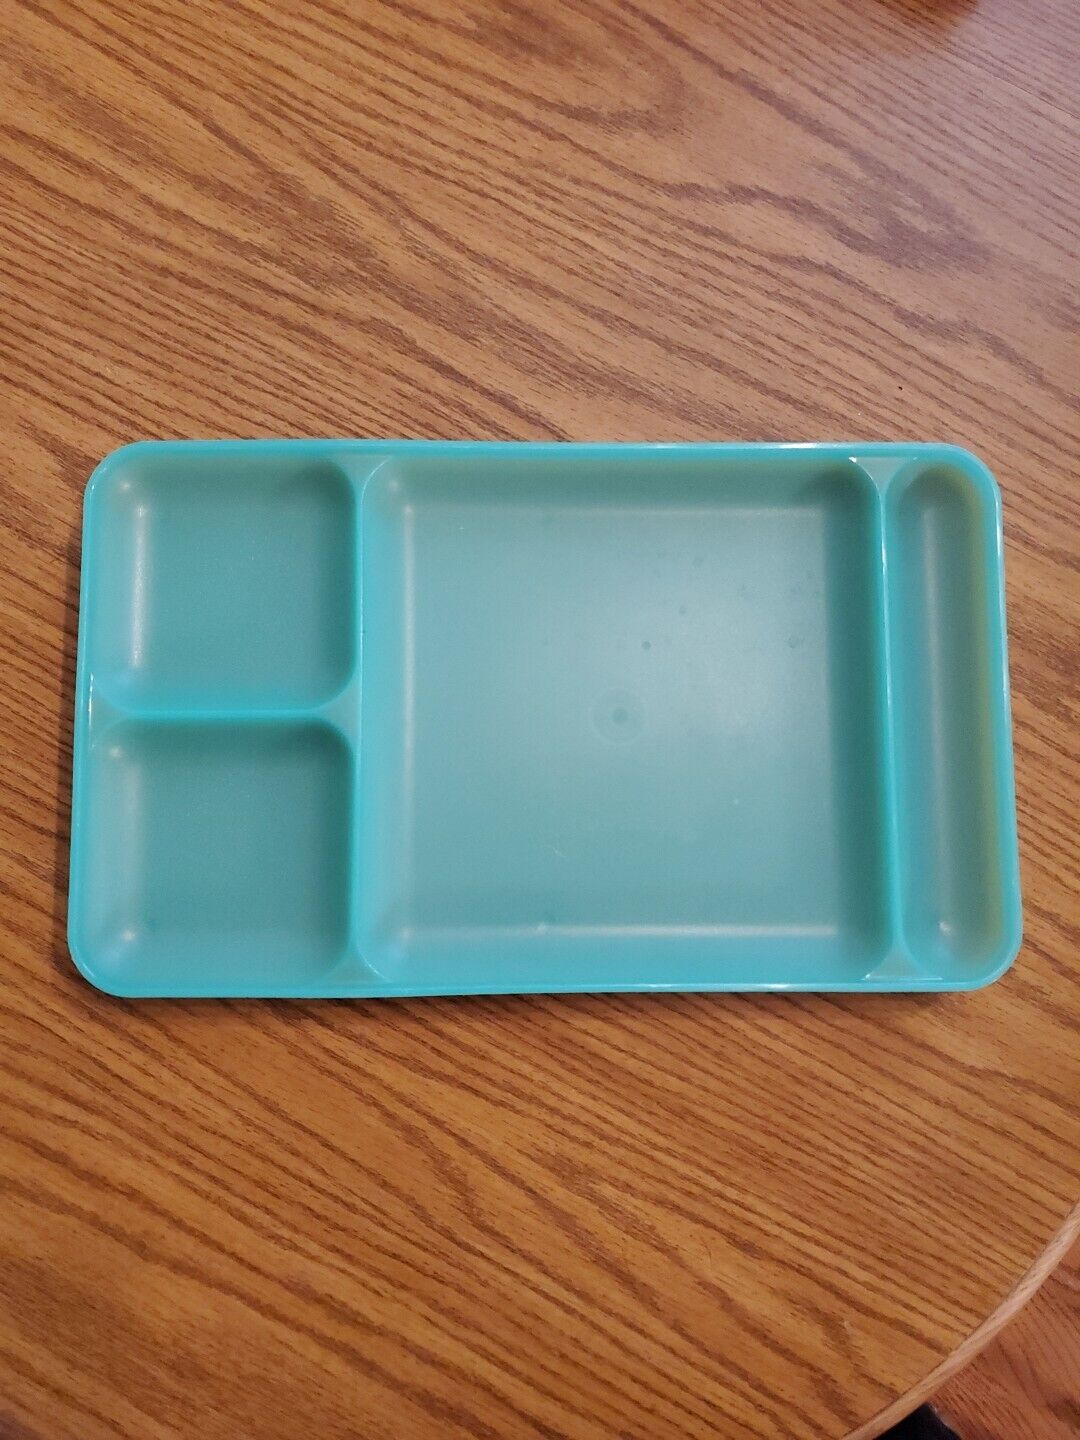 Tupperware Meal Trays 1535 Lot Of 4 Divided Cafeteria Lunch Picnic Five Colors